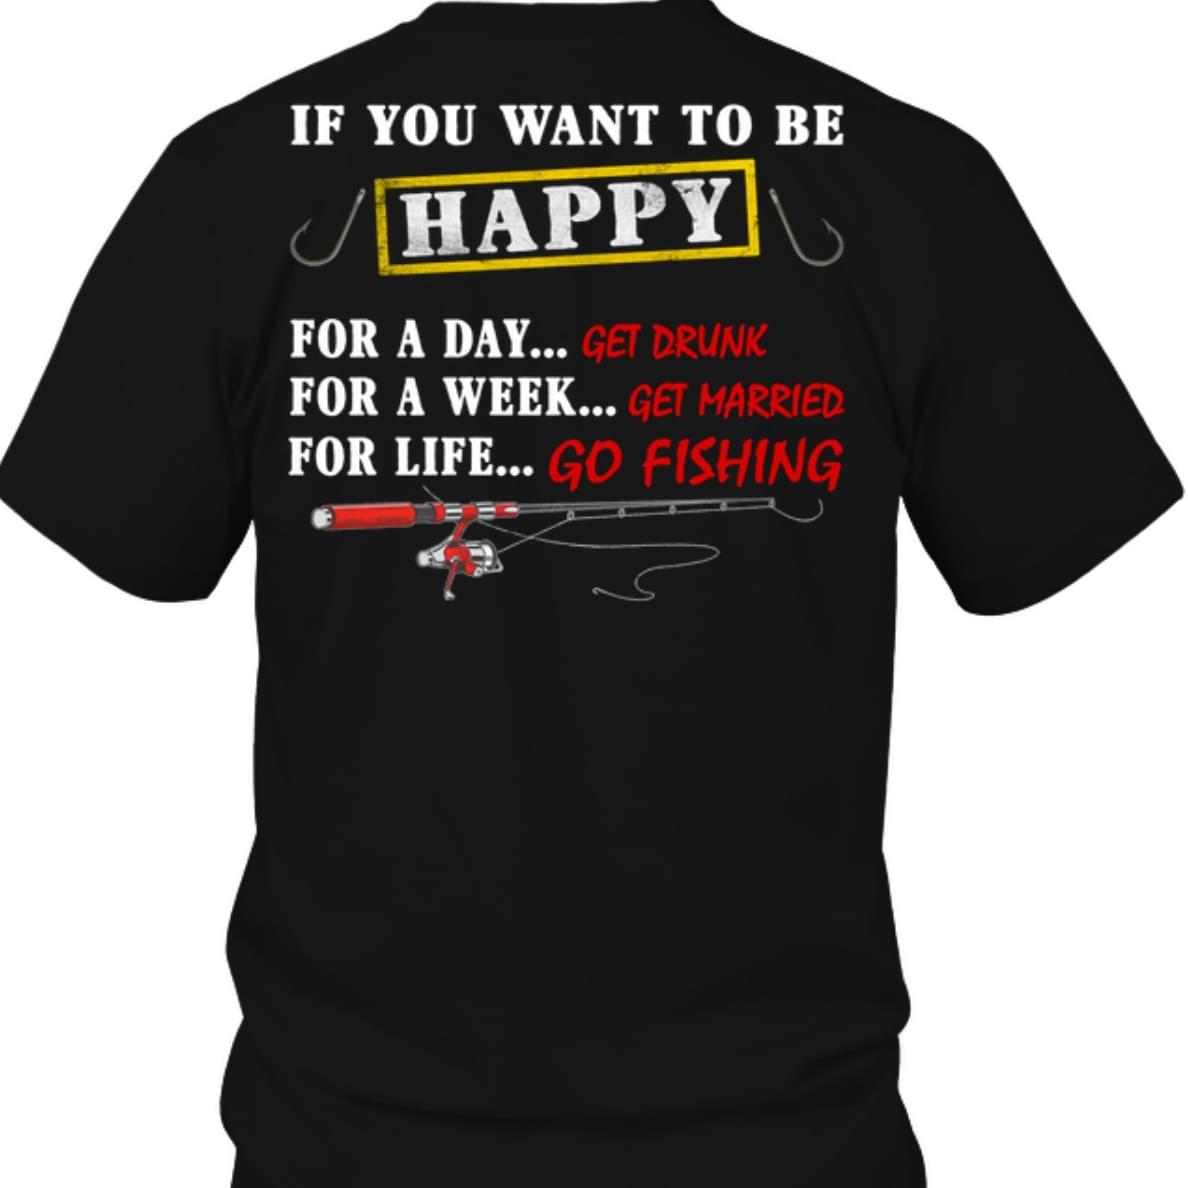 If You Want To Be Happy For A Day Get Drunk For A Week Get Married For Life Go Fishing